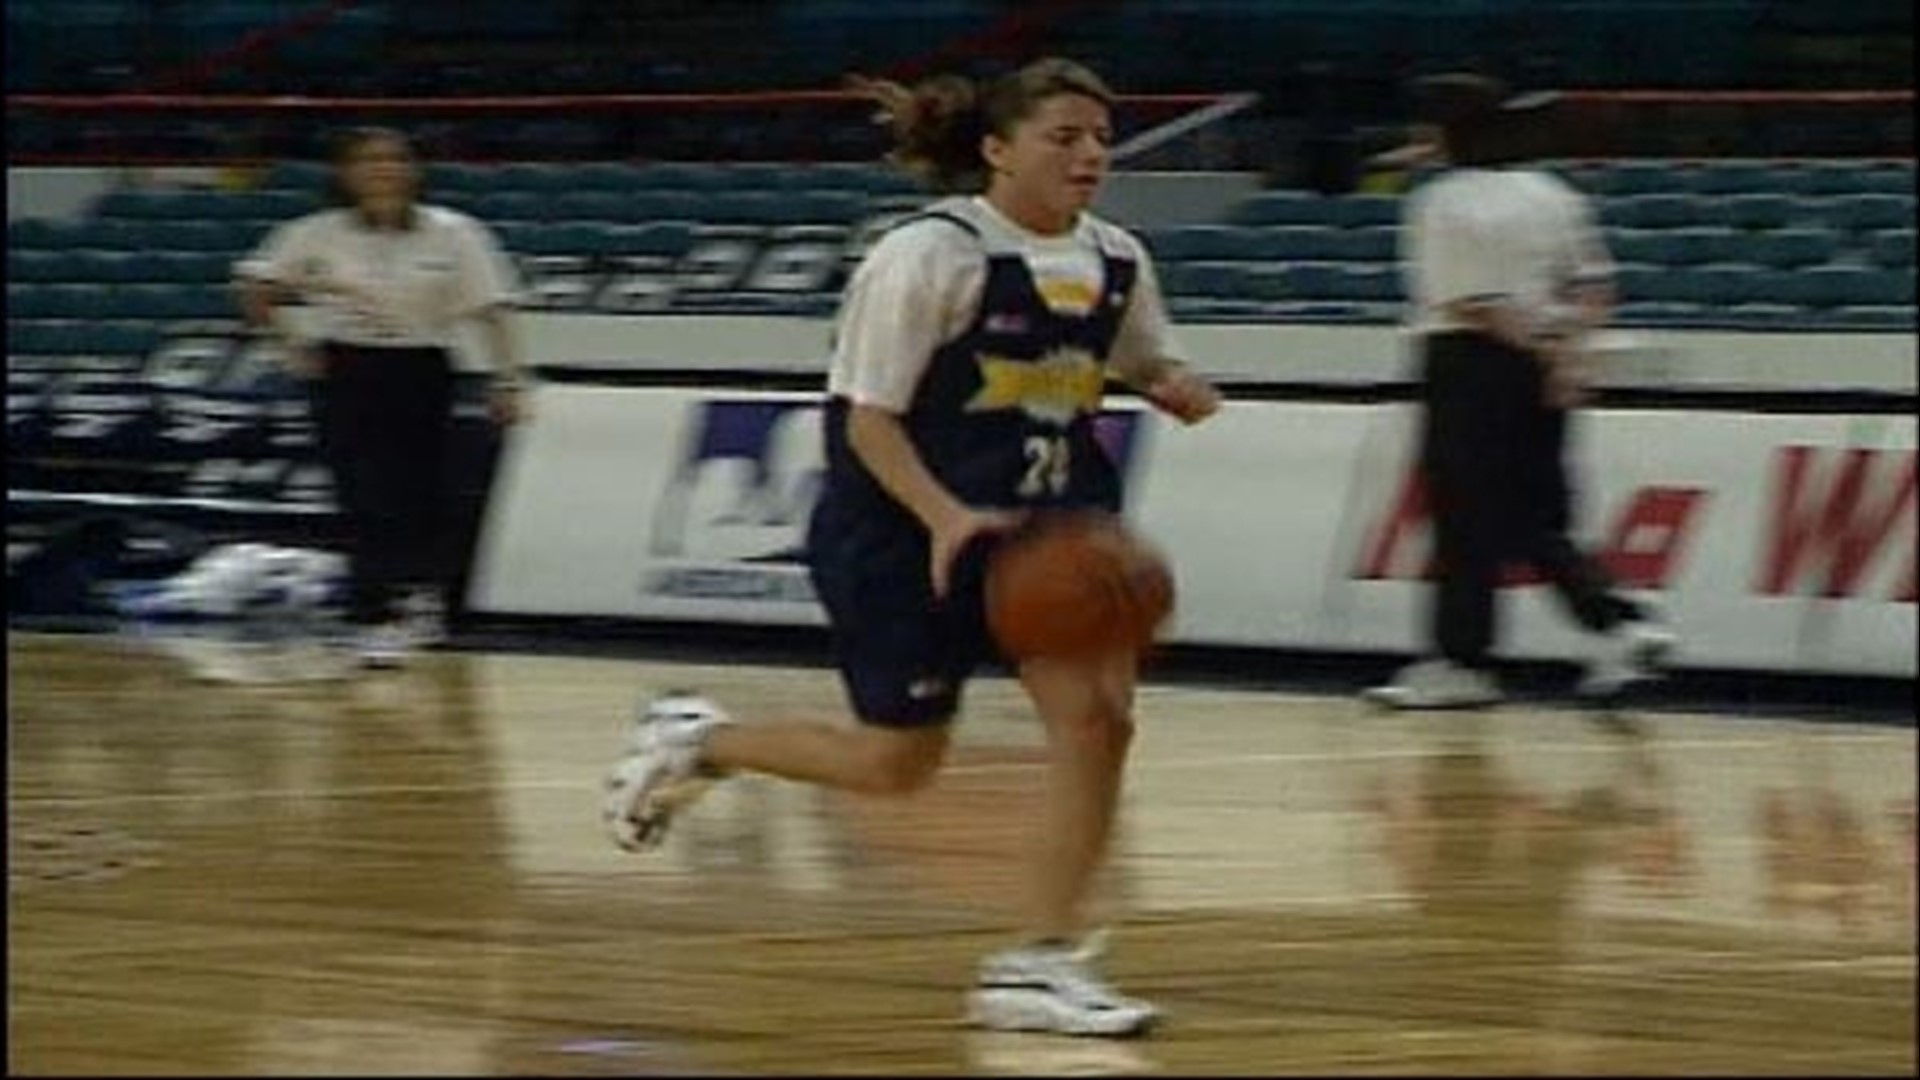 The American Basketball League was formed before the WNBA and Denver had its own team, the Colorado Xplosion. CU star Shelley Sheetz was among the first signed.